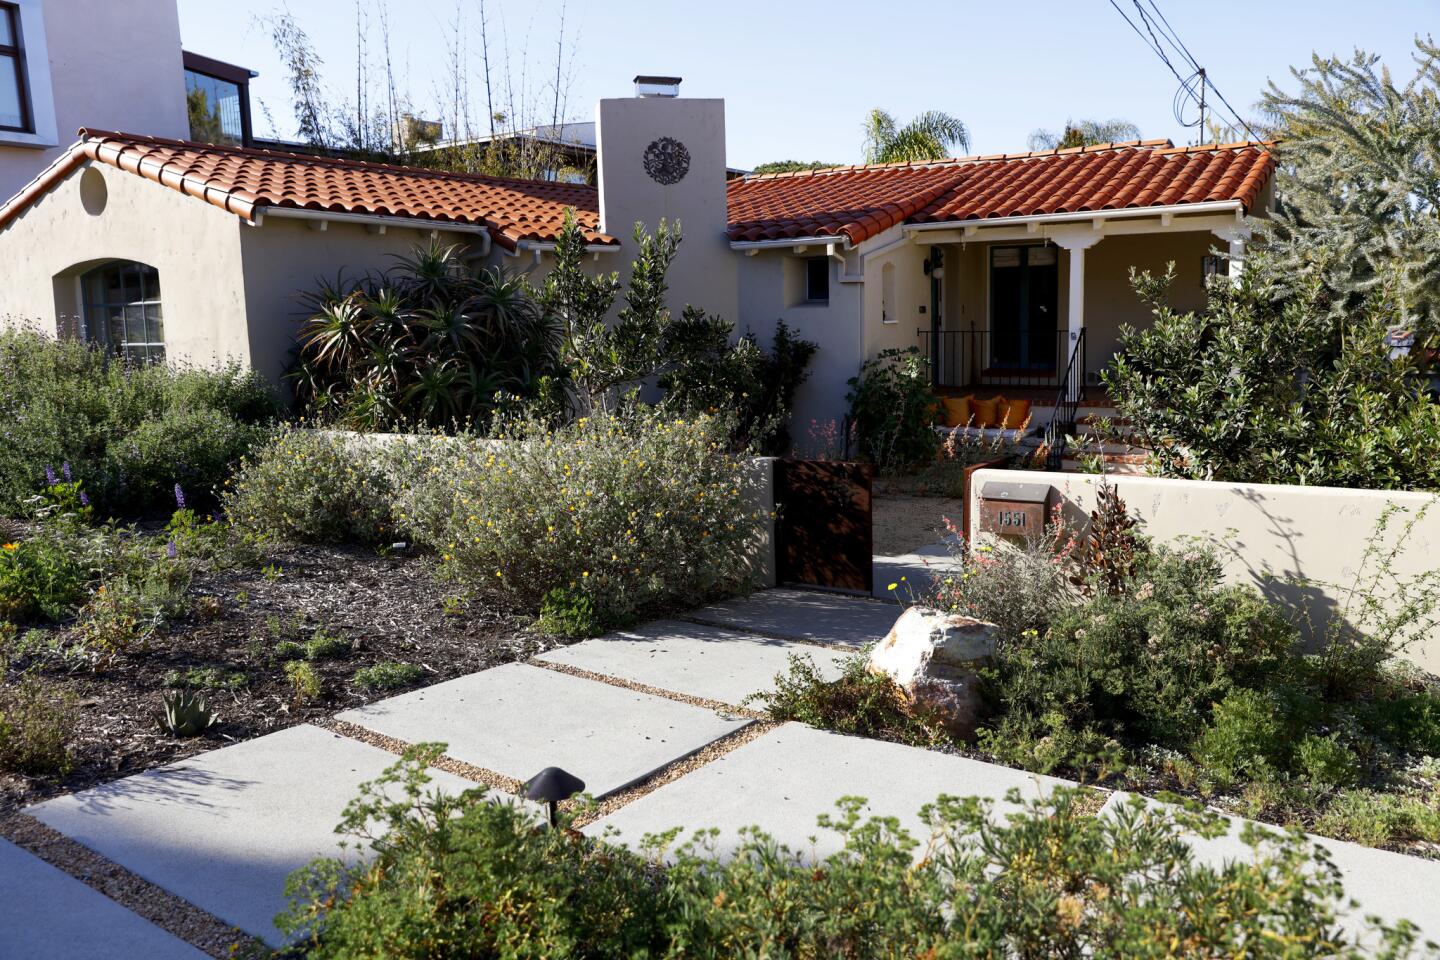 The Olsens' front yard originally featured a semi-circular driveway that took up much of the yard. Today, it features a selection of California native and some nonnative, drought-tolerant plants. Oakley Gardens added California gravel in between the pavers shown here that will allow water to percolate back in to the soil.